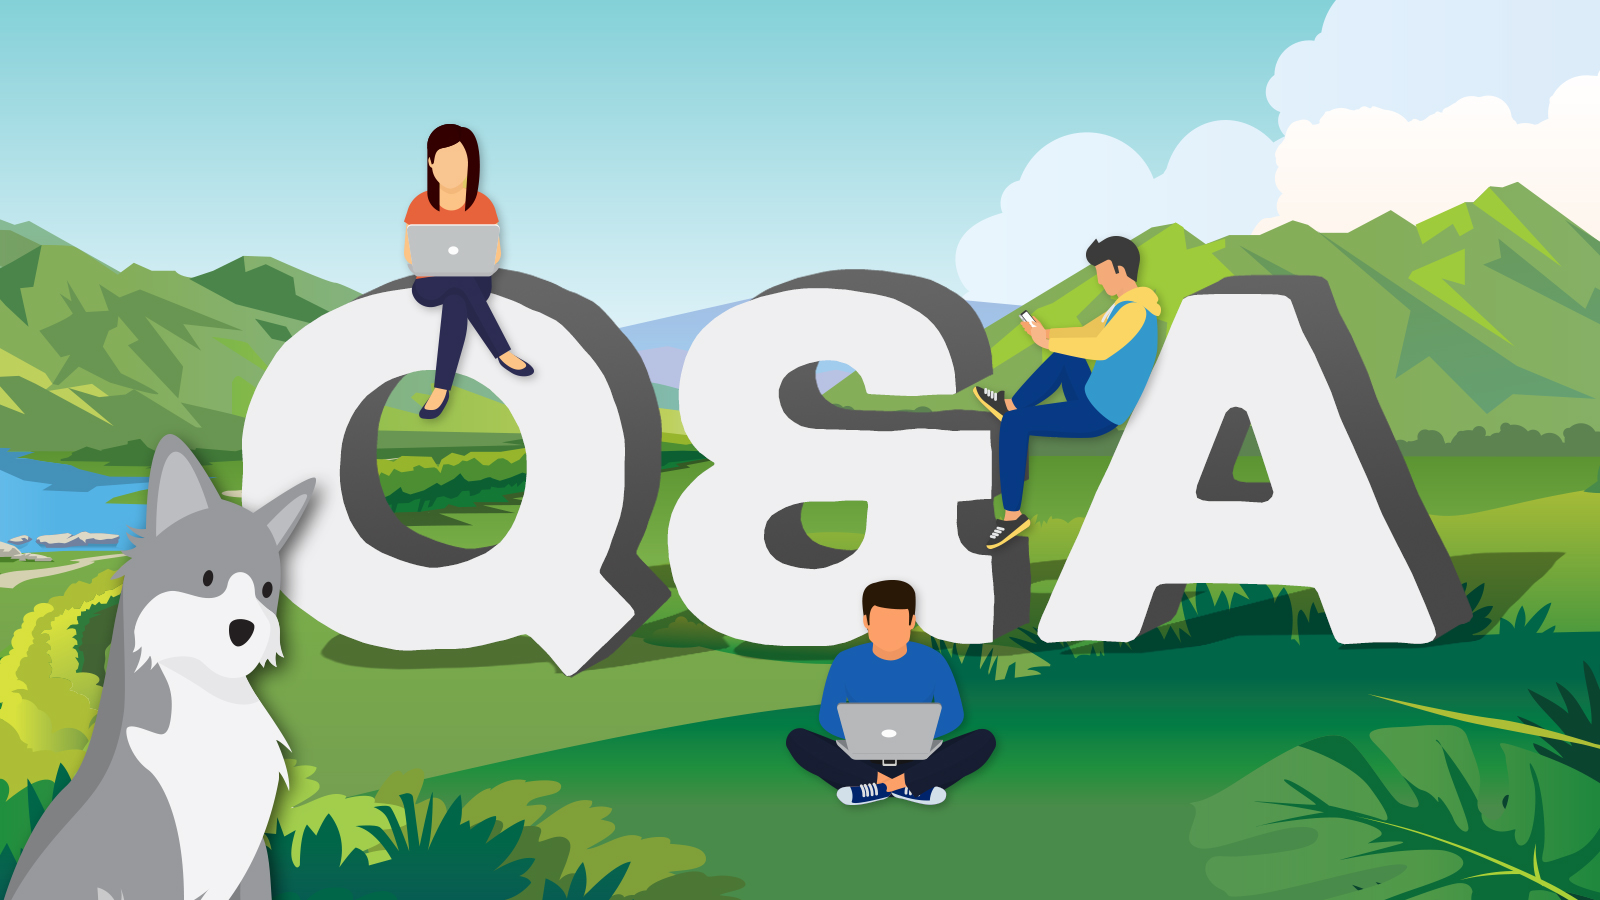 An Exclusive Q&A with a Salesforce Architect: What "Salesforce Strong" Means to Cynthia Qiao